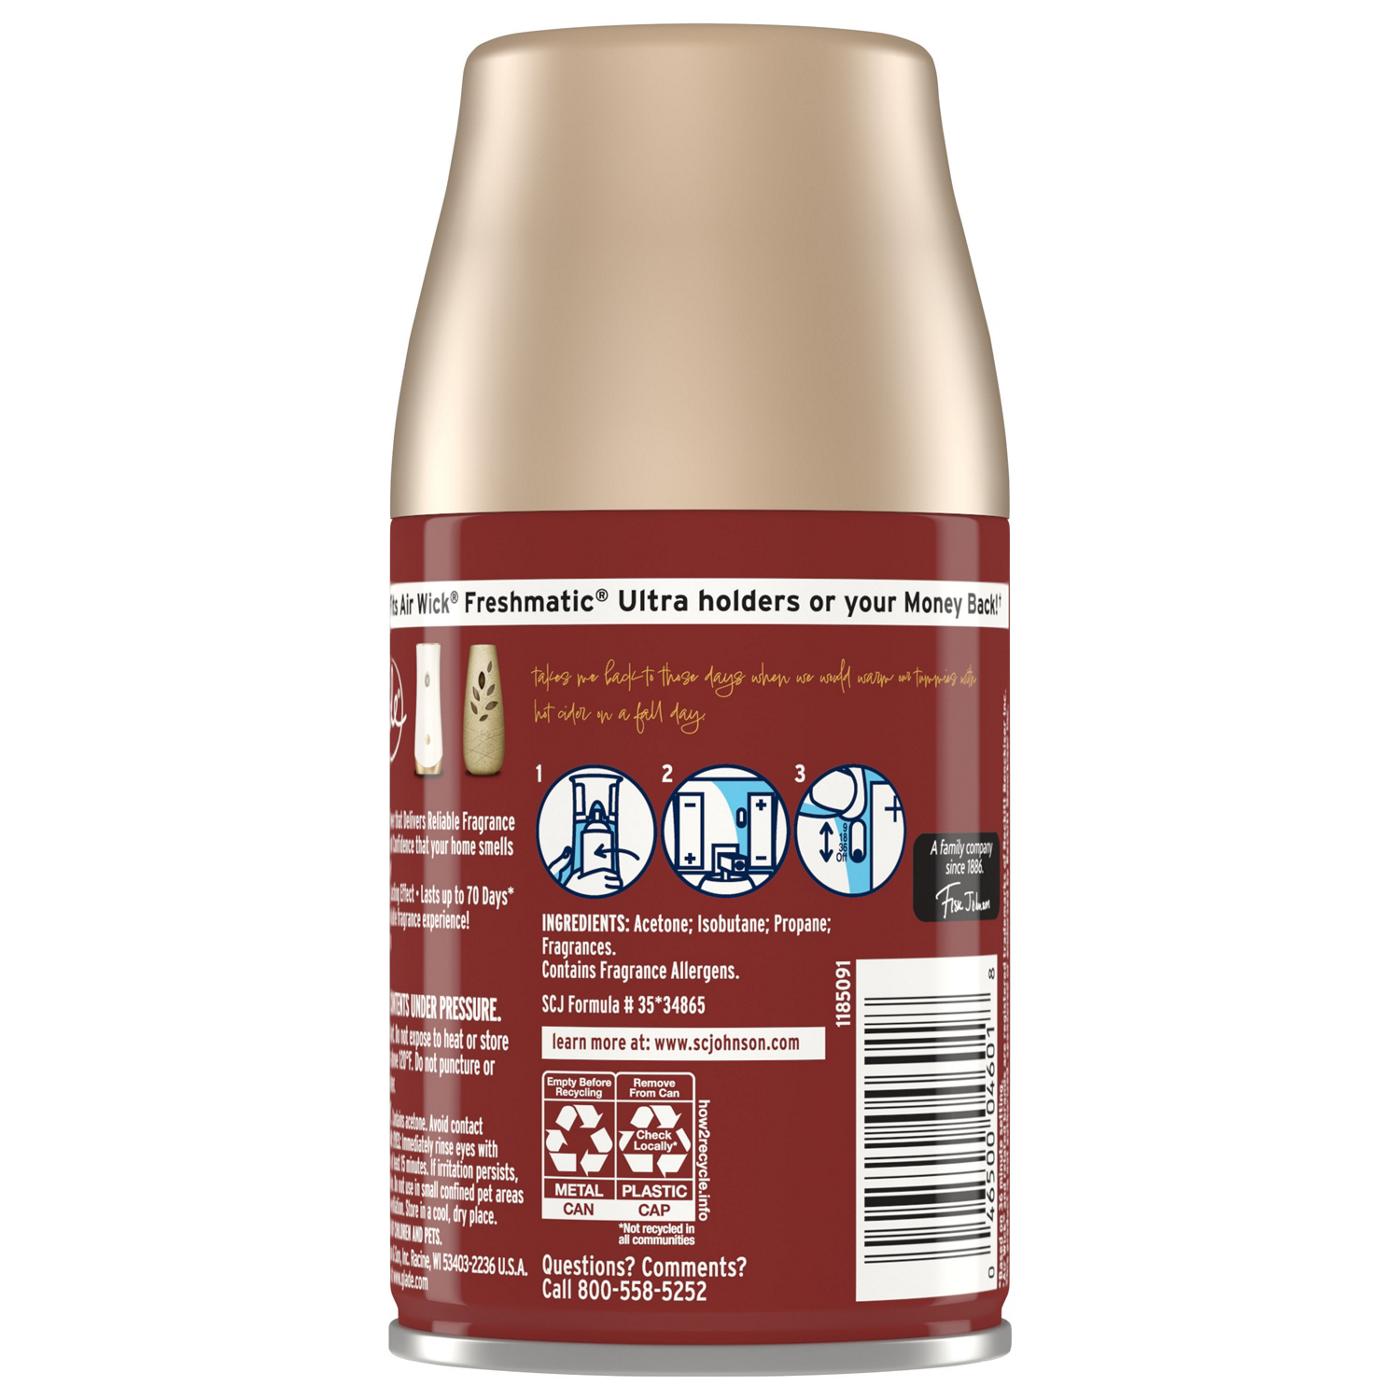 Glade Automatic Spray Refill - Autumn Spiced Apple; image 2 of 2